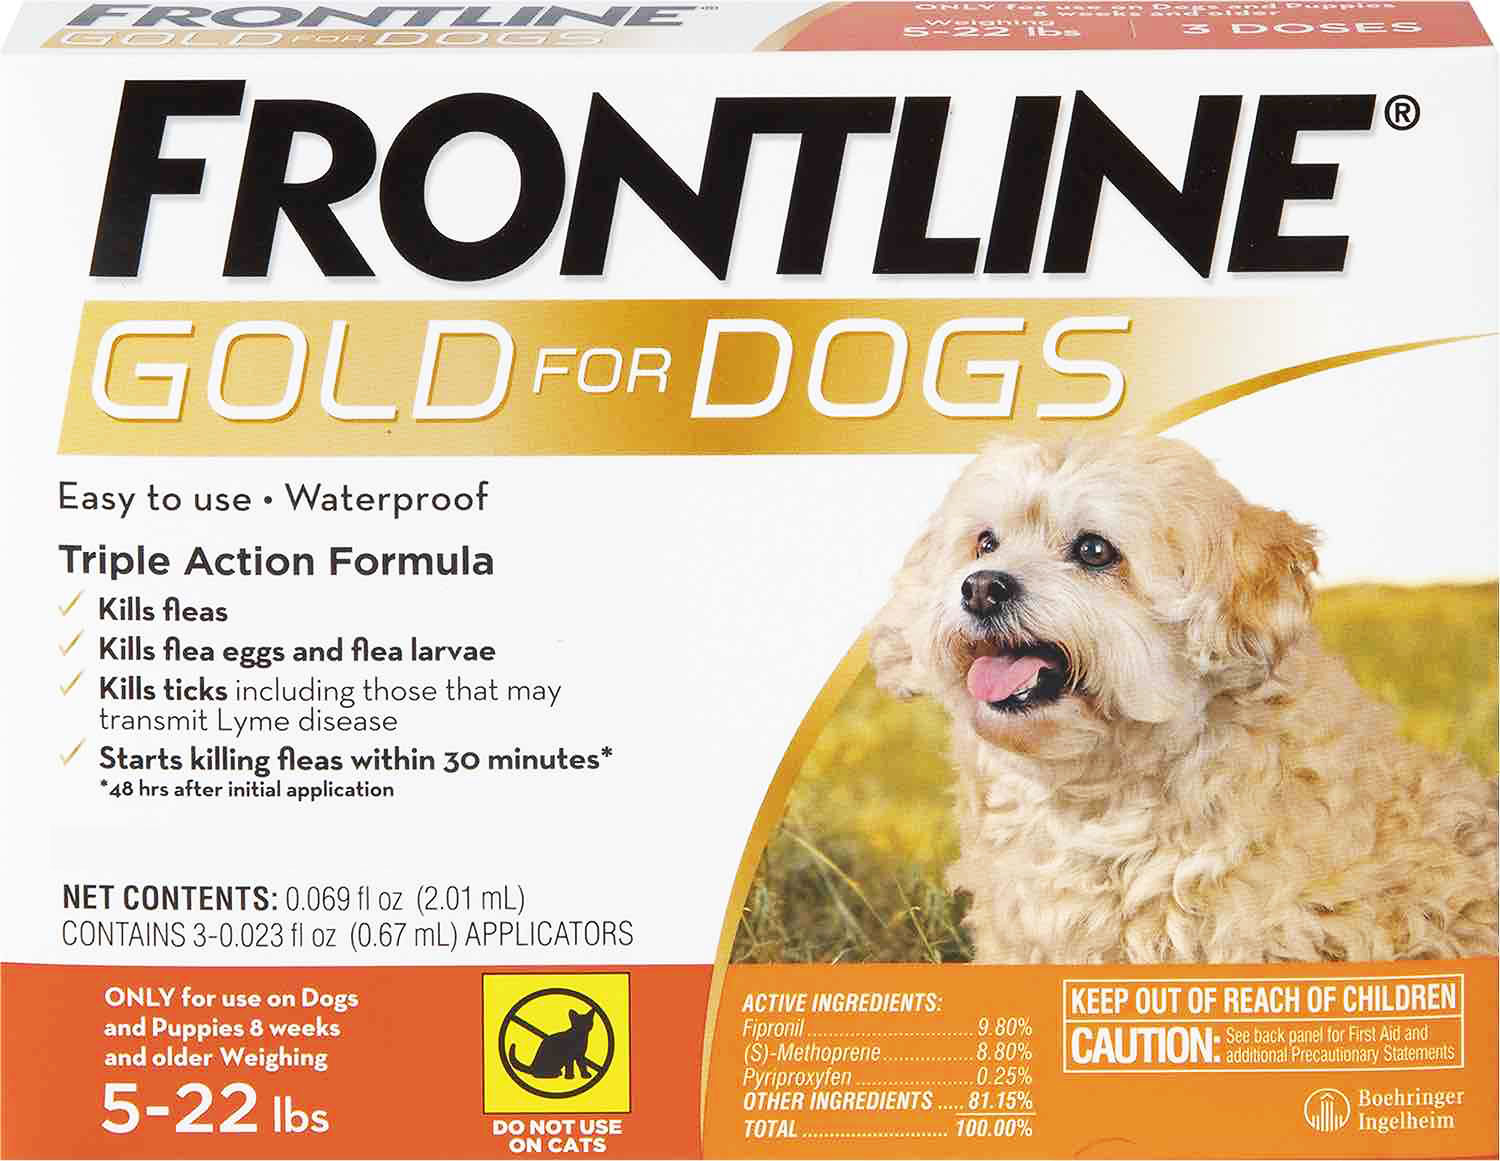 Frontline Gold for Dogs 1 dose 5-22 lbs (Orange) 1